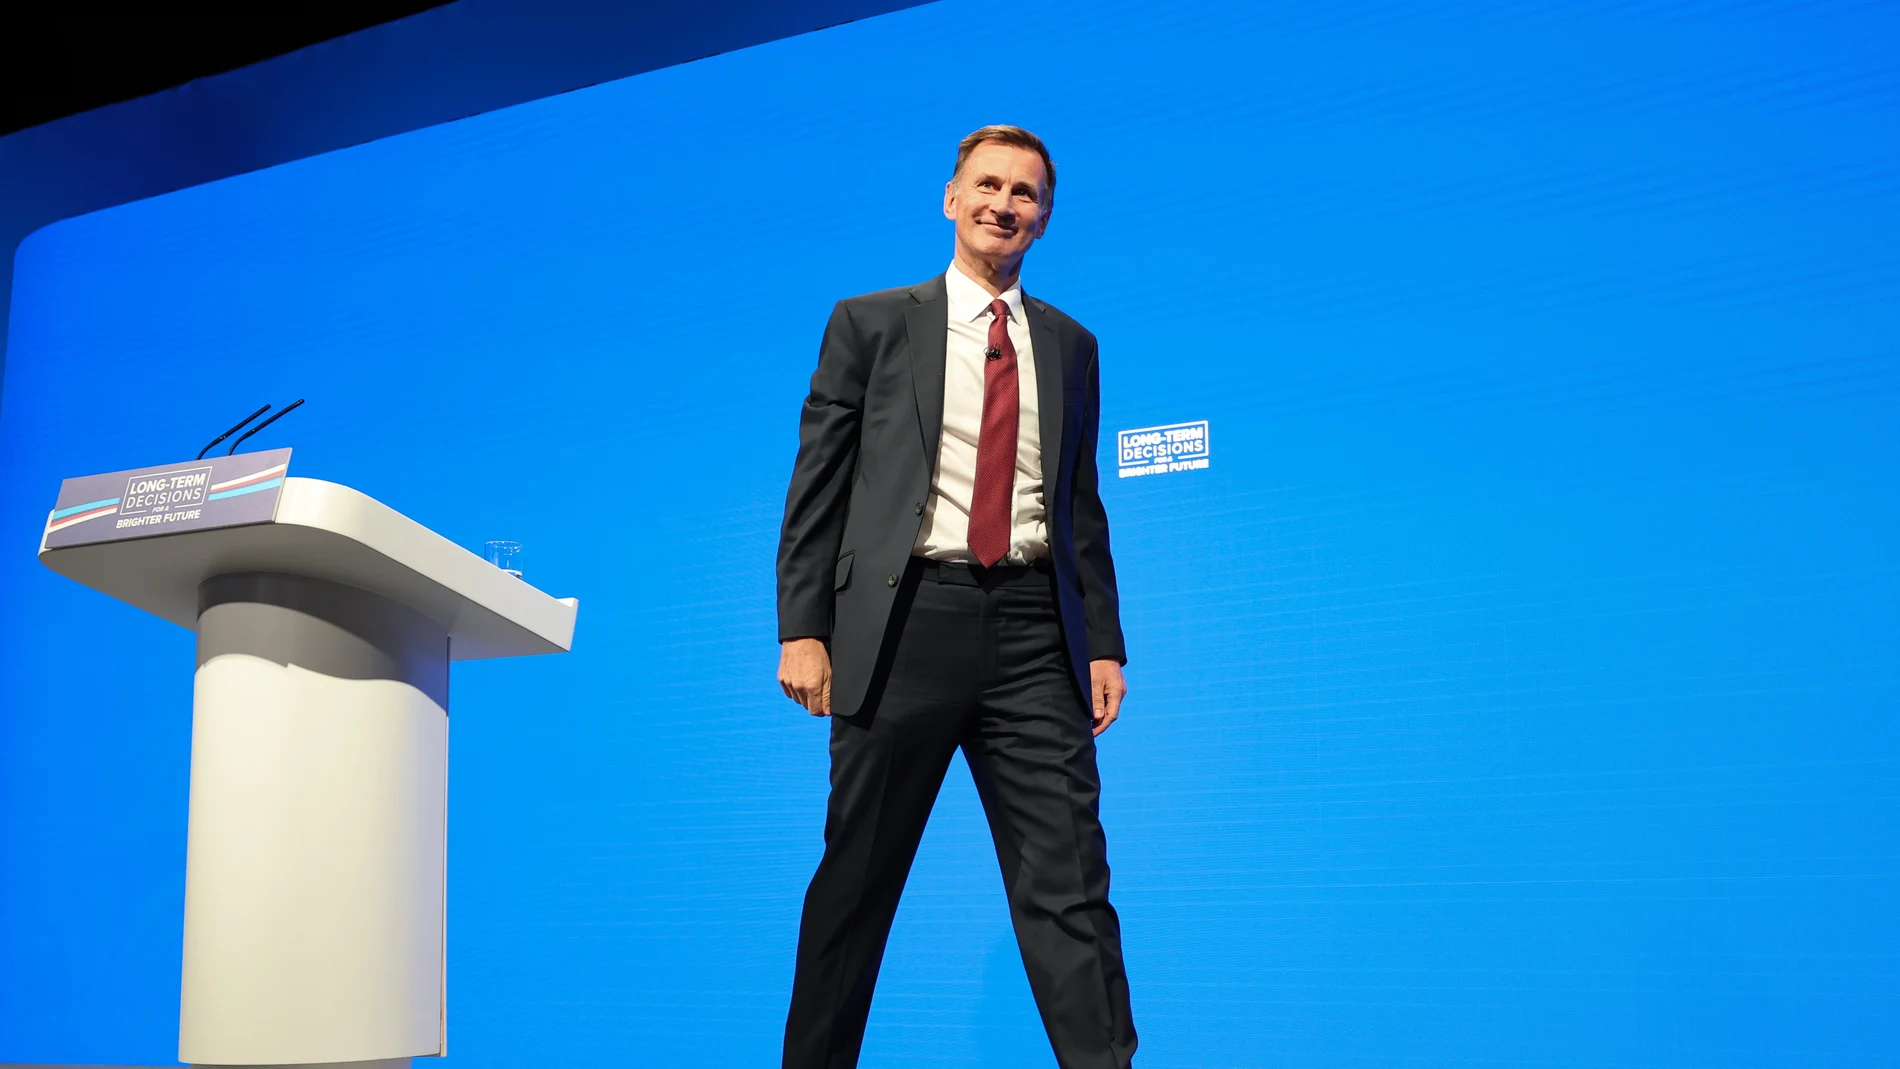 British Chancellor of the Exchequer Jeremy Hunt walks on stage at the Conservative Party Conference in Manchester, Britain, 02 October 2023. The conference runs from 01 to 04 October at Manchester Central.